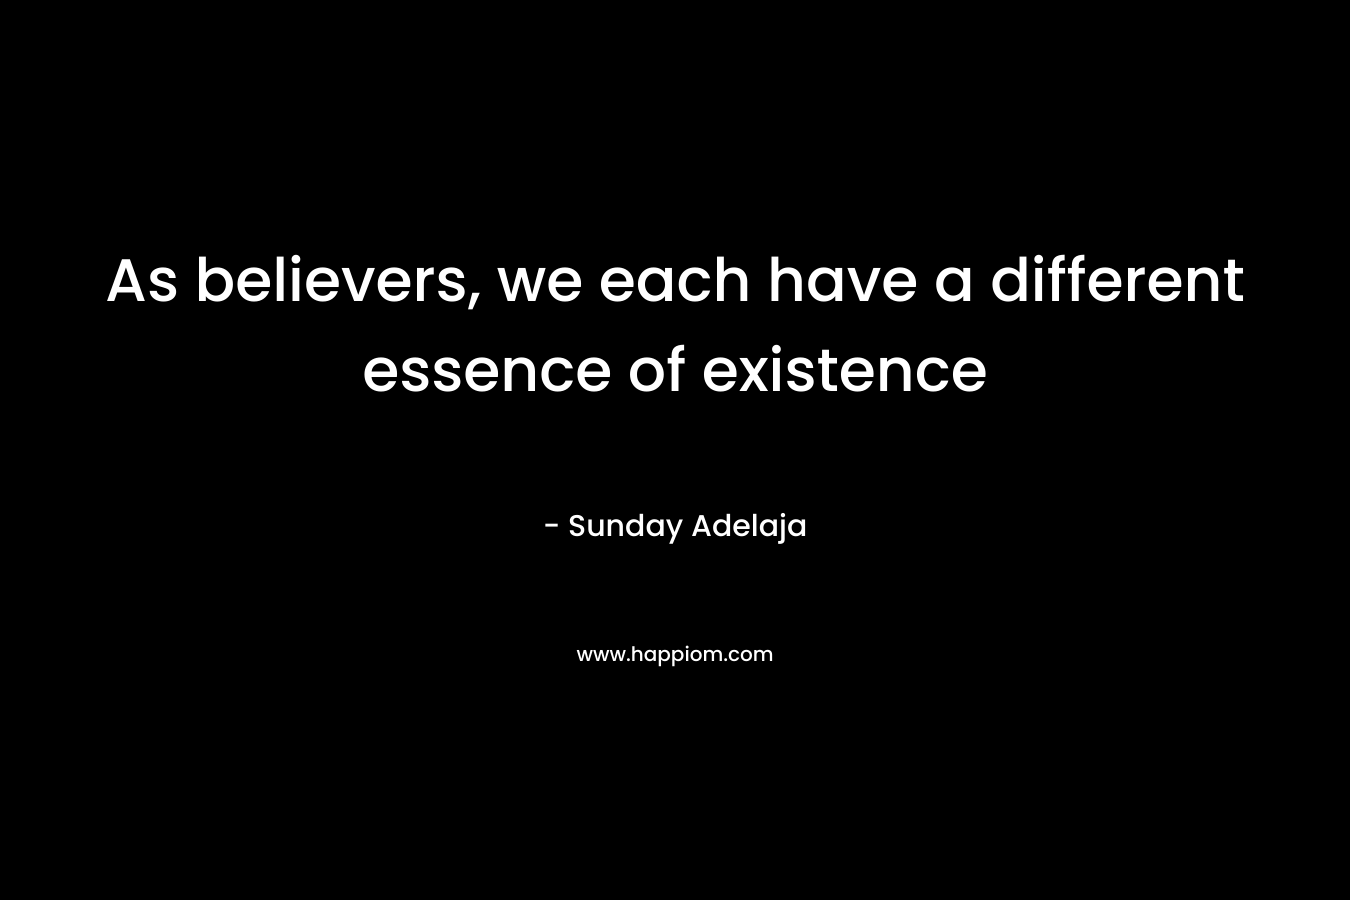 As believers, we each have a different essence of existence